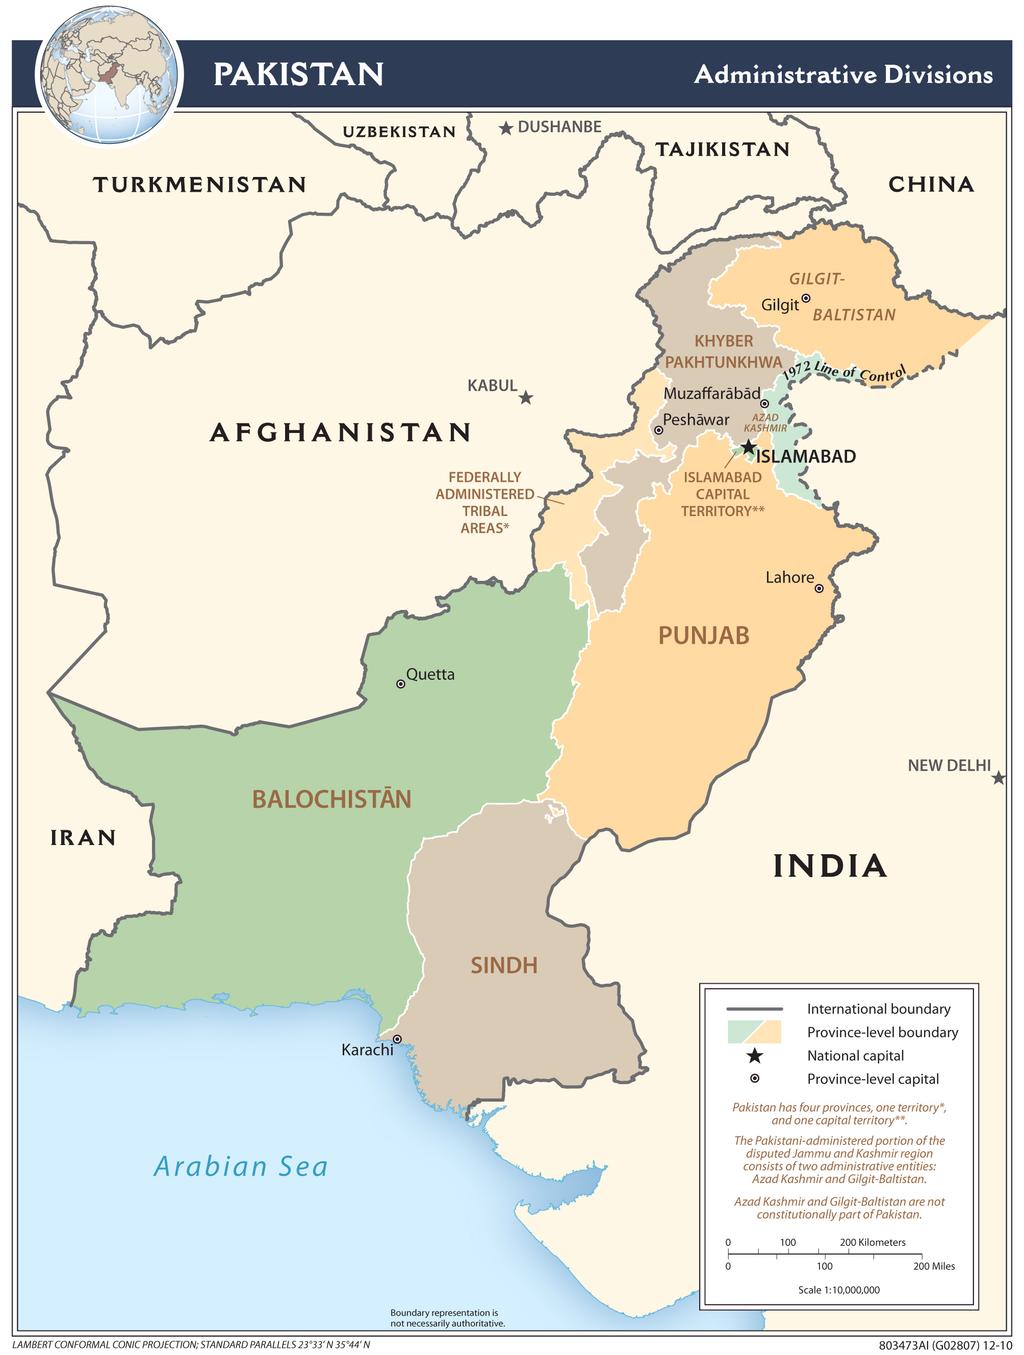 Map 2 4 4 Perry-Castañeda Library Map Collection - Pakistan Maps, Pakistan (Administrative Divisions)